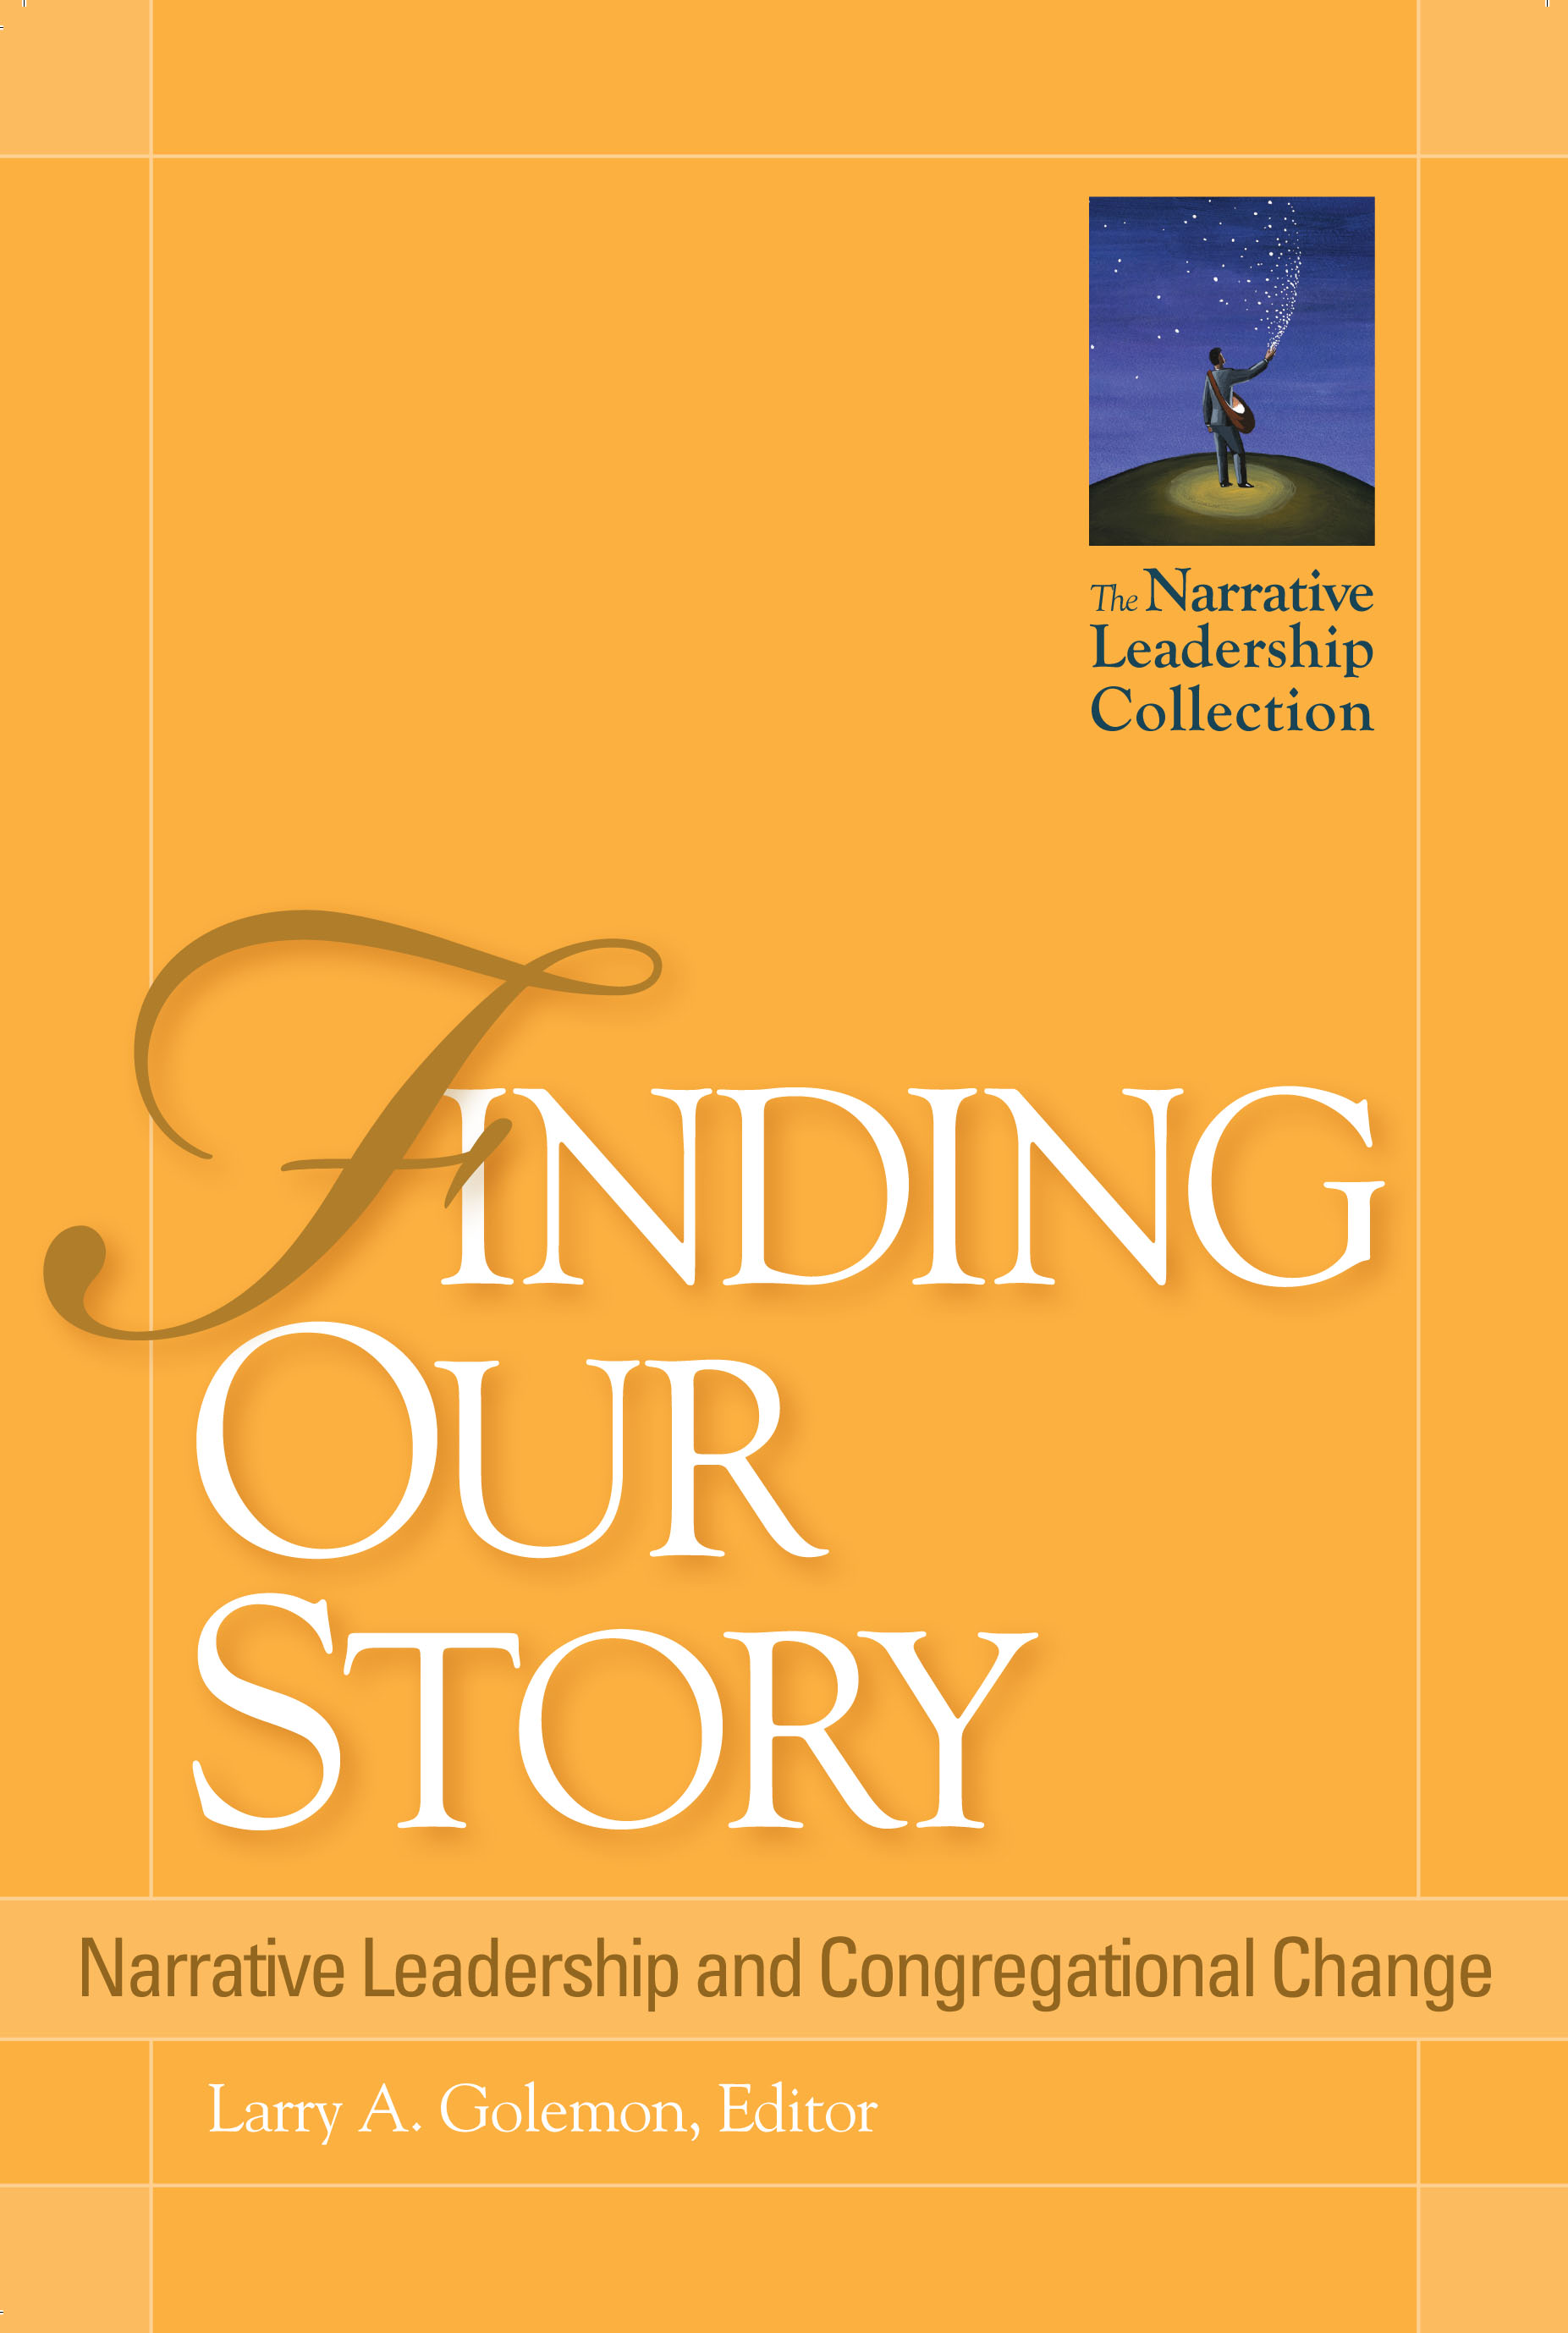 Finding Our Story: Narrative Leadership and Congregational Change